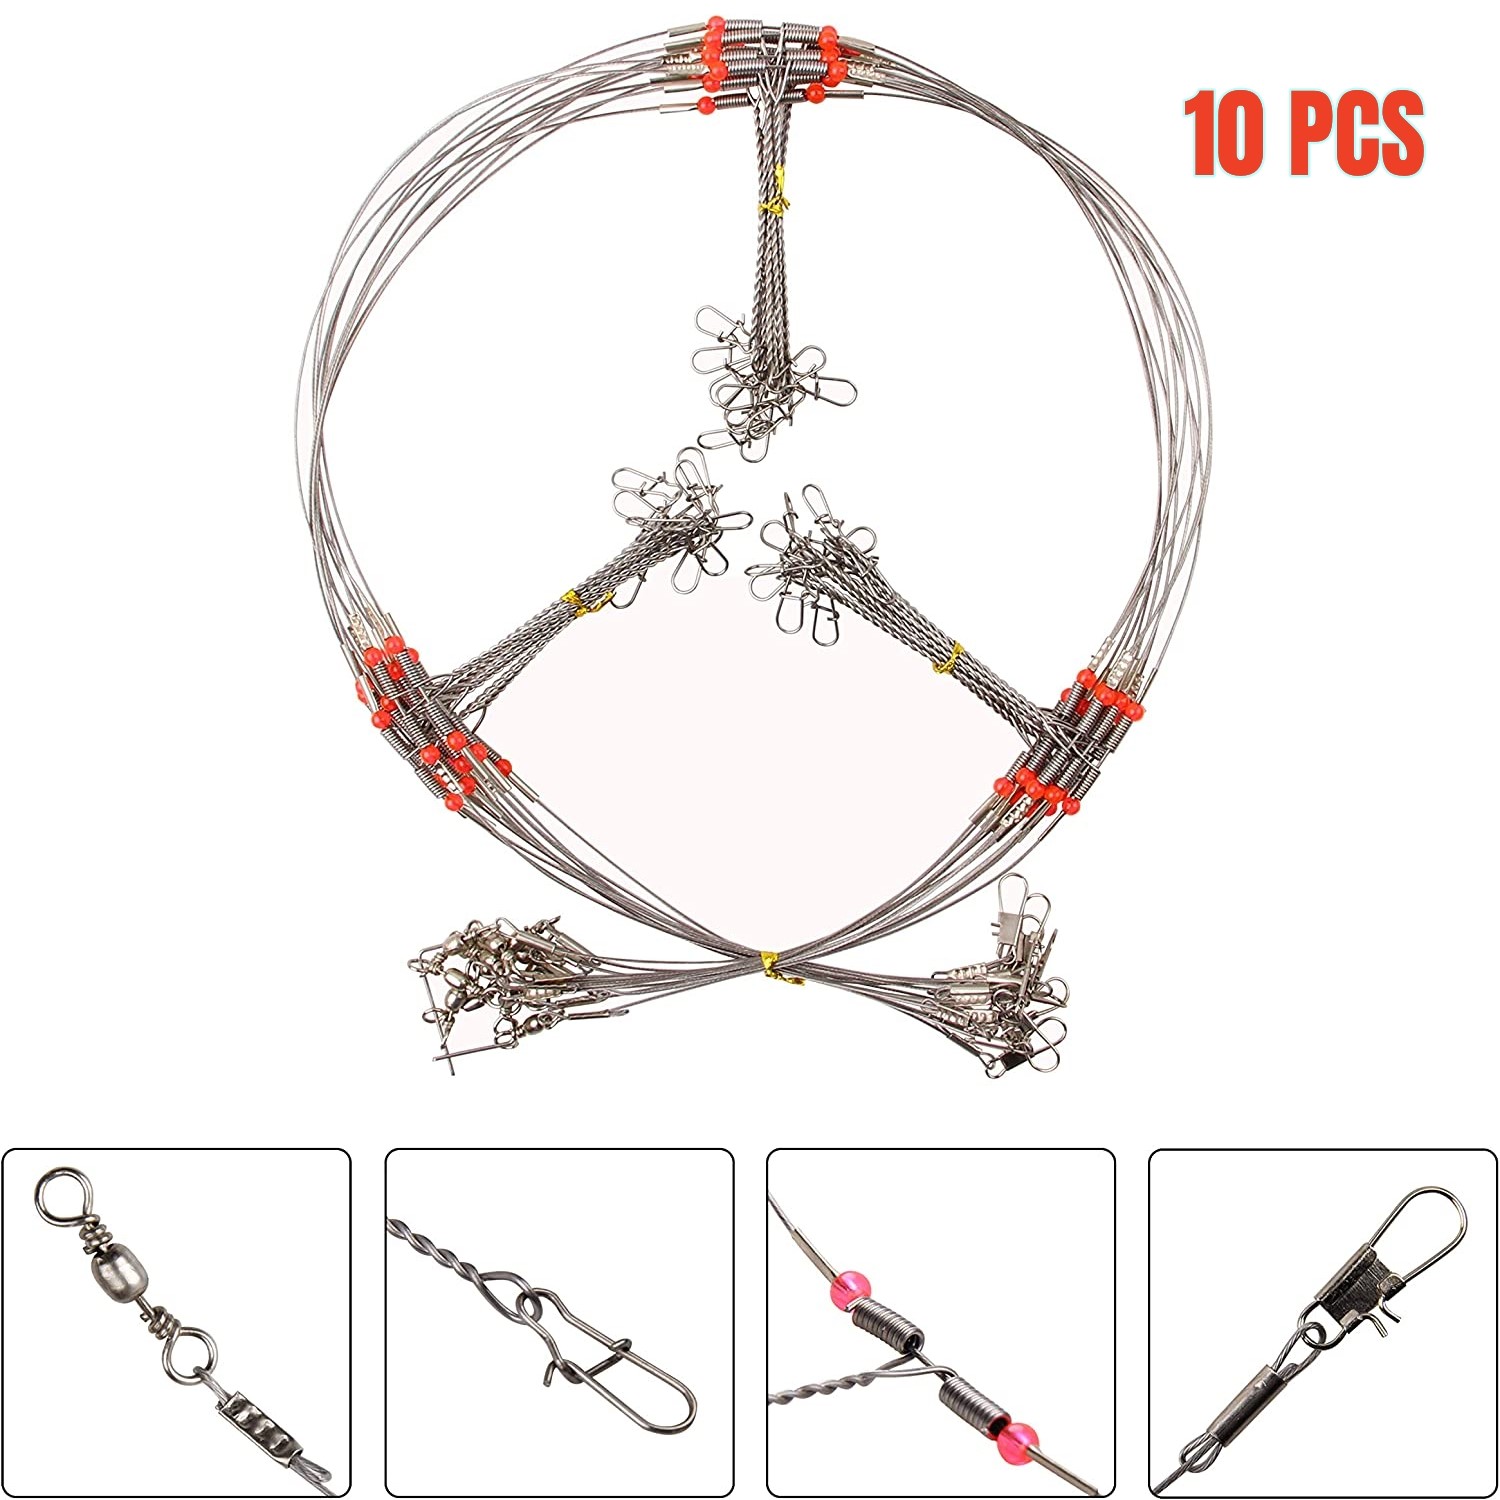 12pcs/lot Stainless Steel Fishing Wire Leaders Rigs with Swivels Snaps High  Strength Fishing Leader Rigs Fishing Trace Lures Wire Leader Spinner